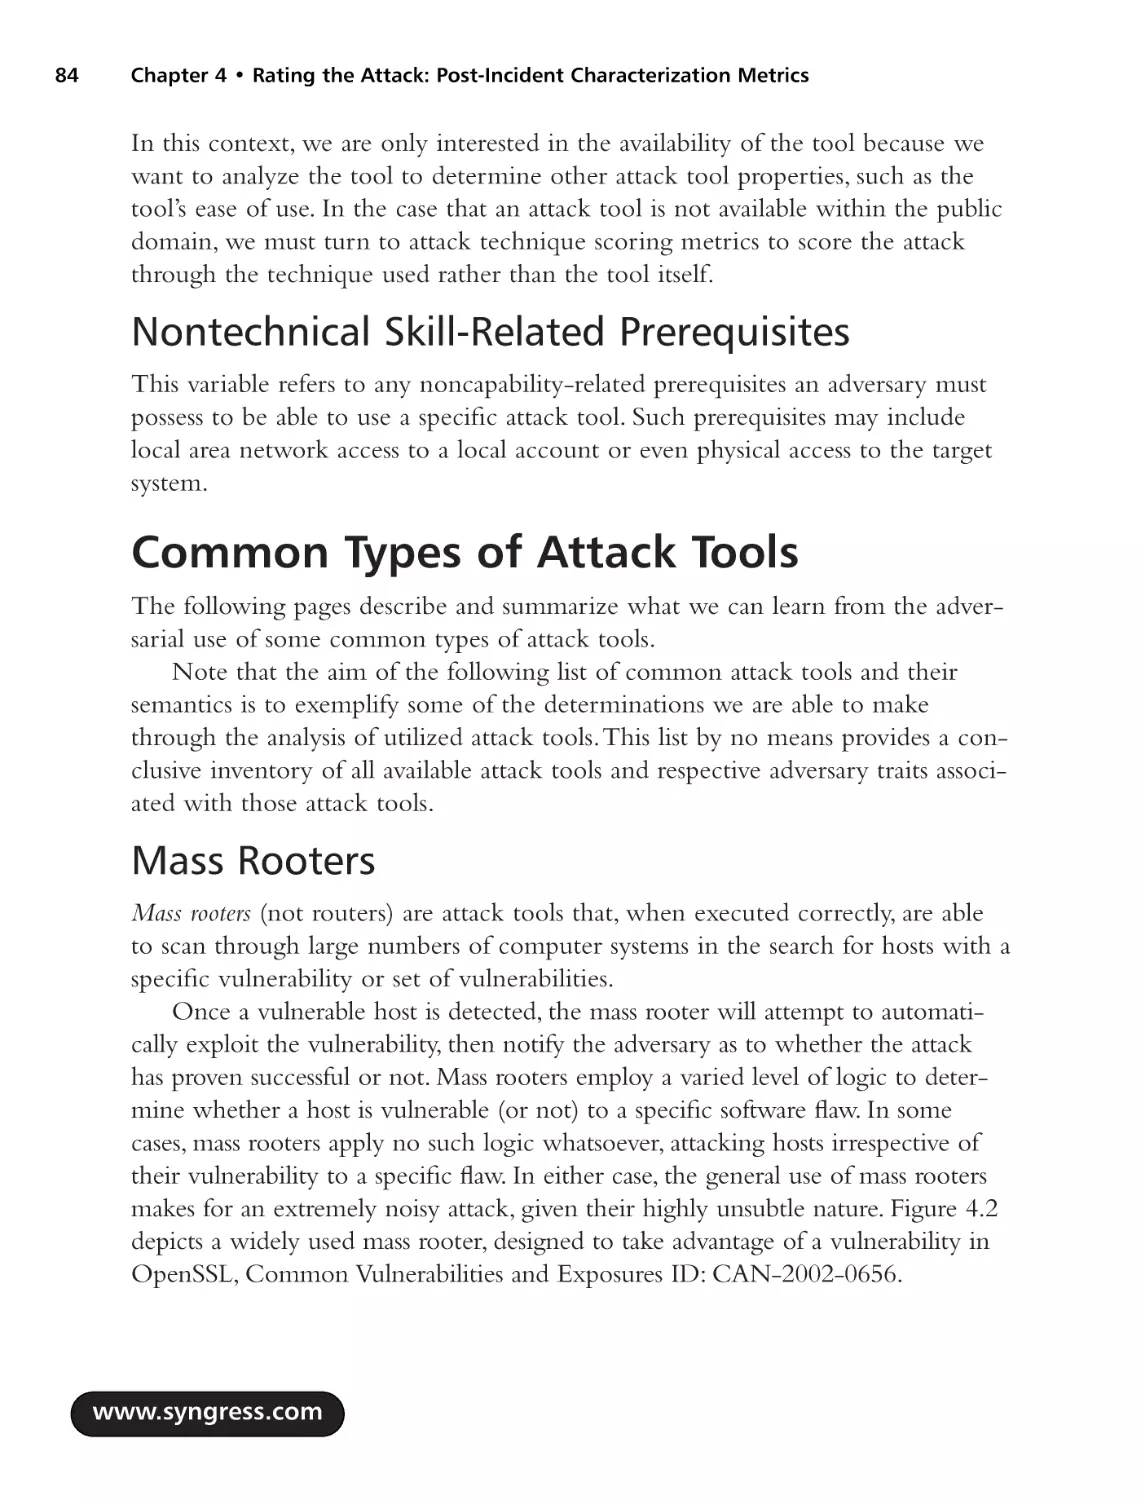 Nontechnical Skill-Related Prerequisites
Common Types of Attack Tools
Mass Rooters